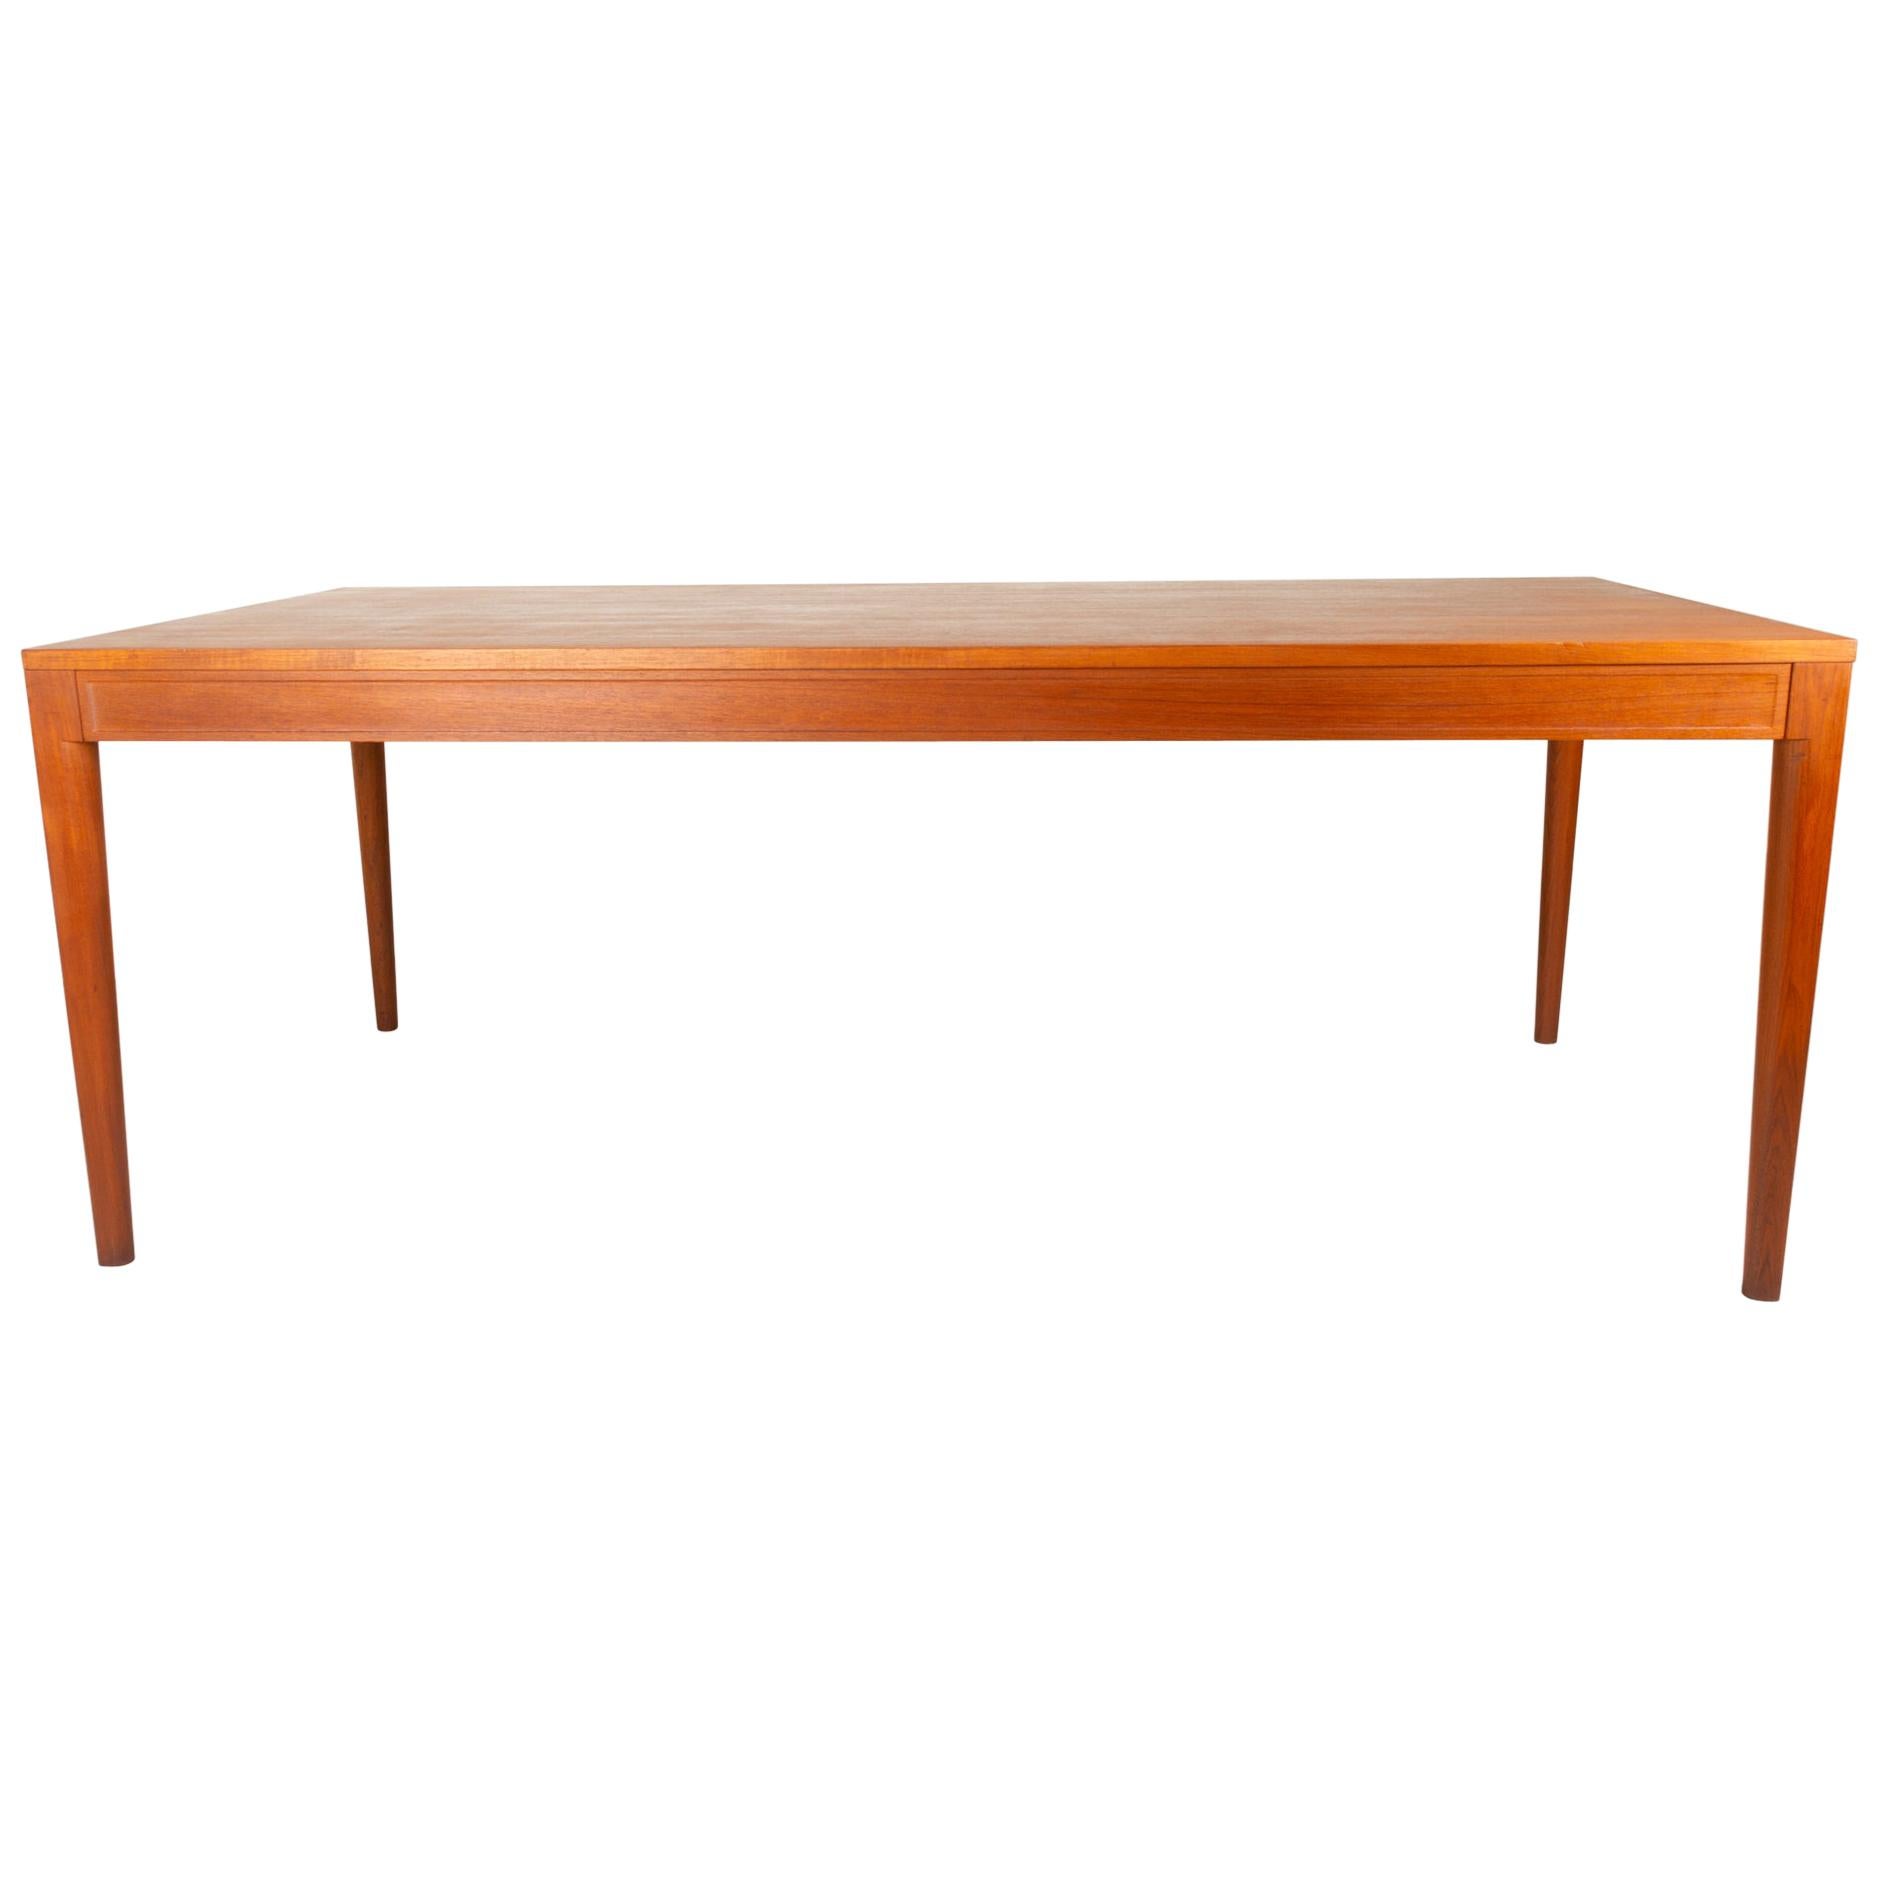 Vintage Danish dining table by Finn Juhl for France & Søn 1960s
Large teak table Model Diplomat by Danish architect Finn Juhl, designed in 1962. Suitable as both a dining table, large writing desk or conference table. Space for eight